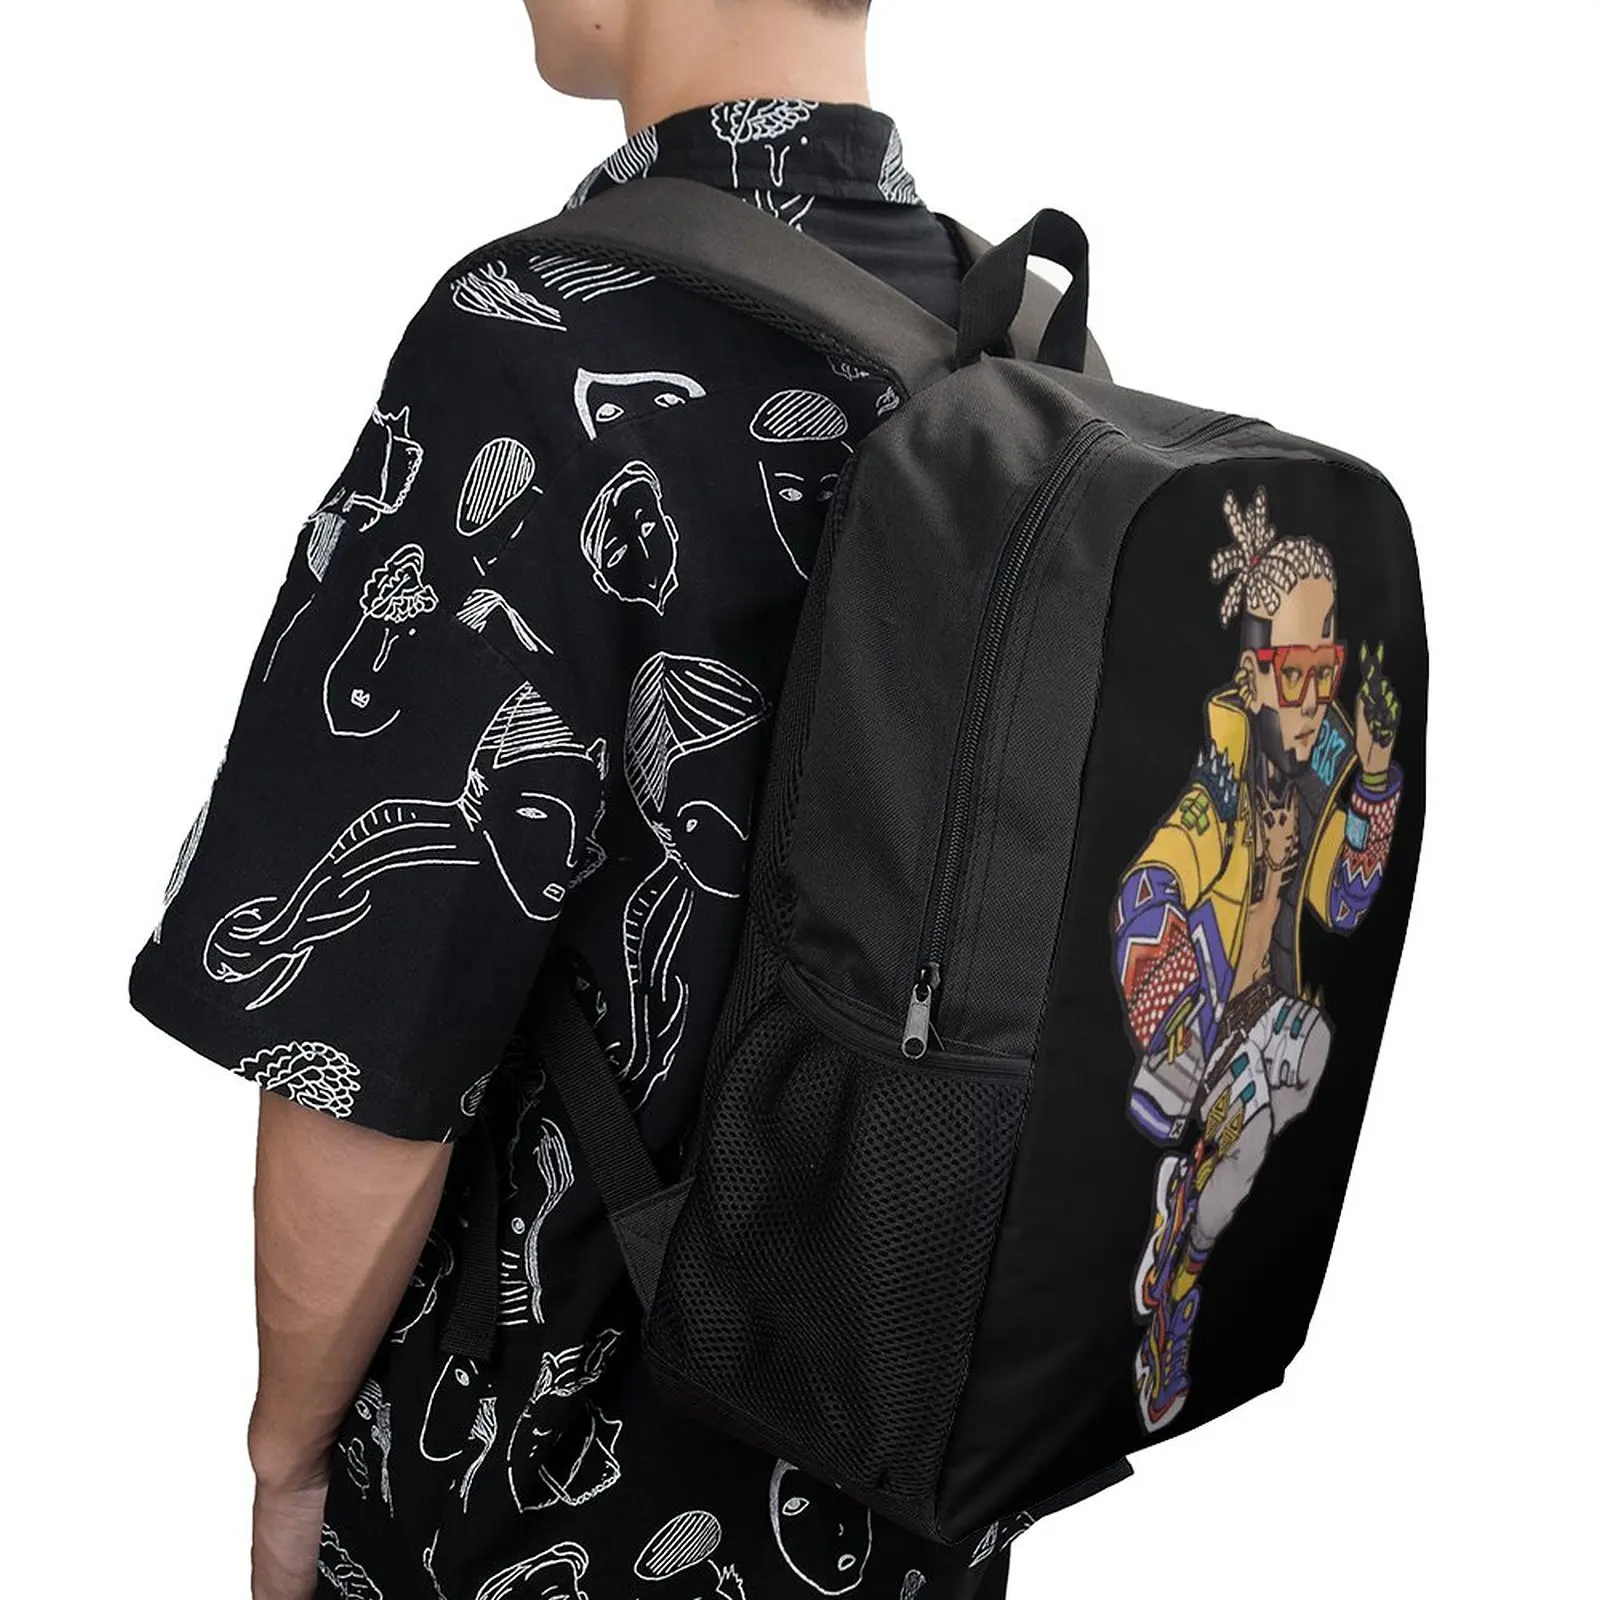 

17 Inch Shoulder Backpack Hypebeast Crypto Apex Legends Secure Creative Comfortable Sports Activities Infantry Pack